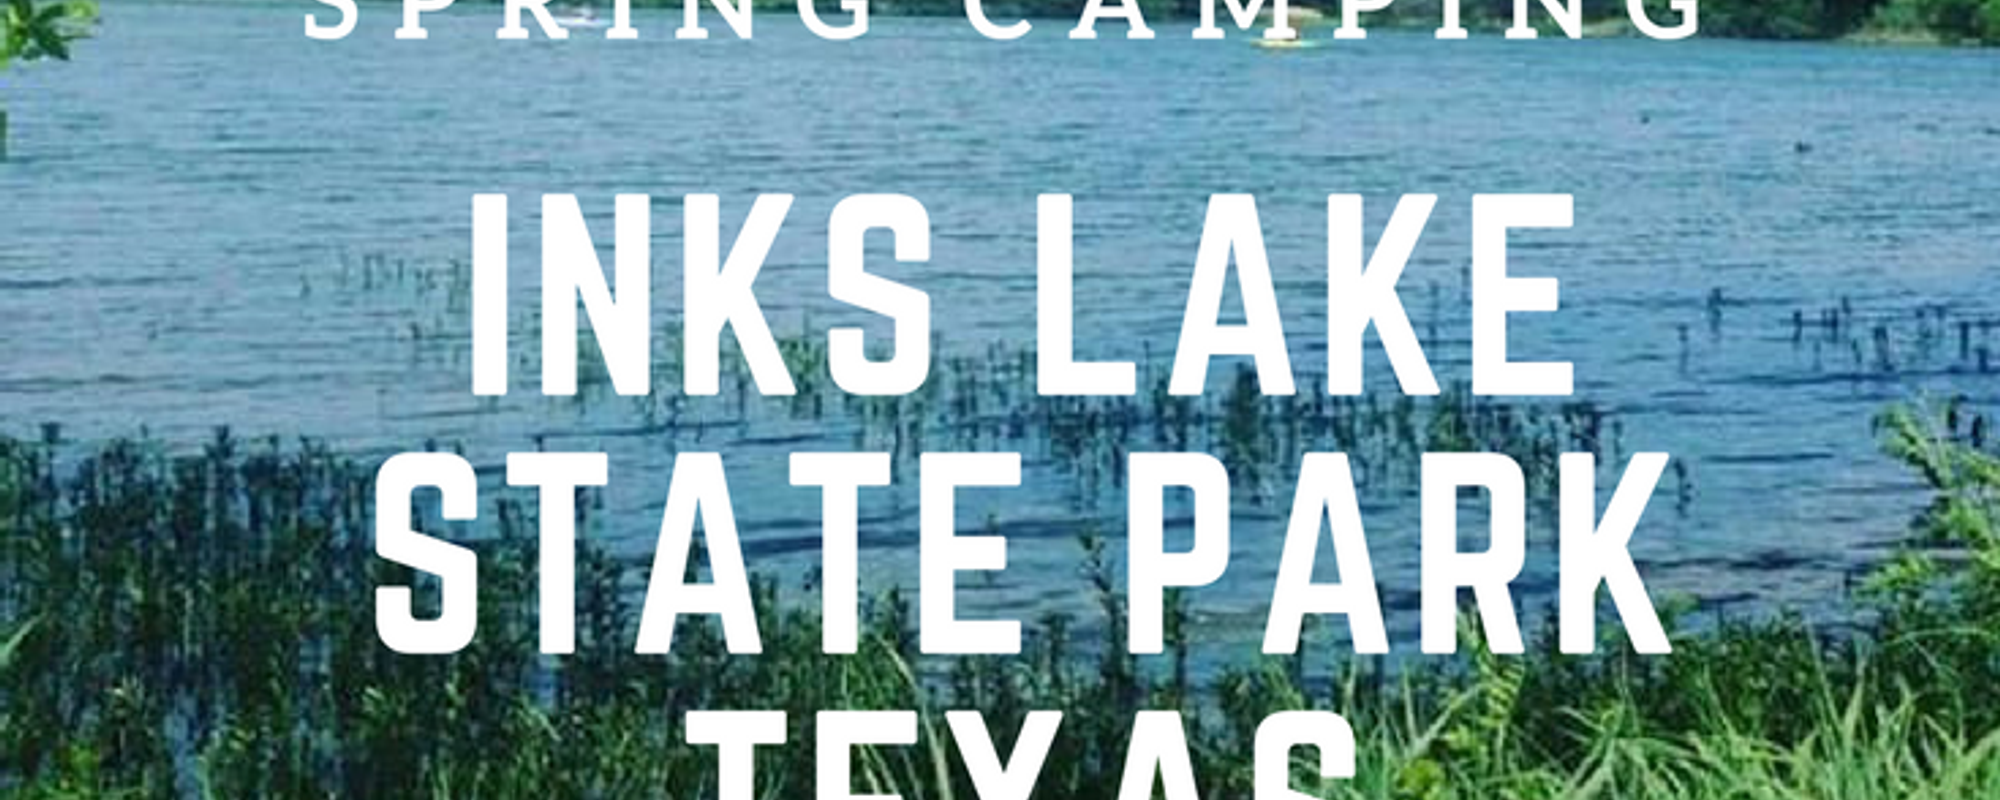 The Simple Getaway: Spring Camping at Inks Lake State Park, Texas 🏕 🌼🌳